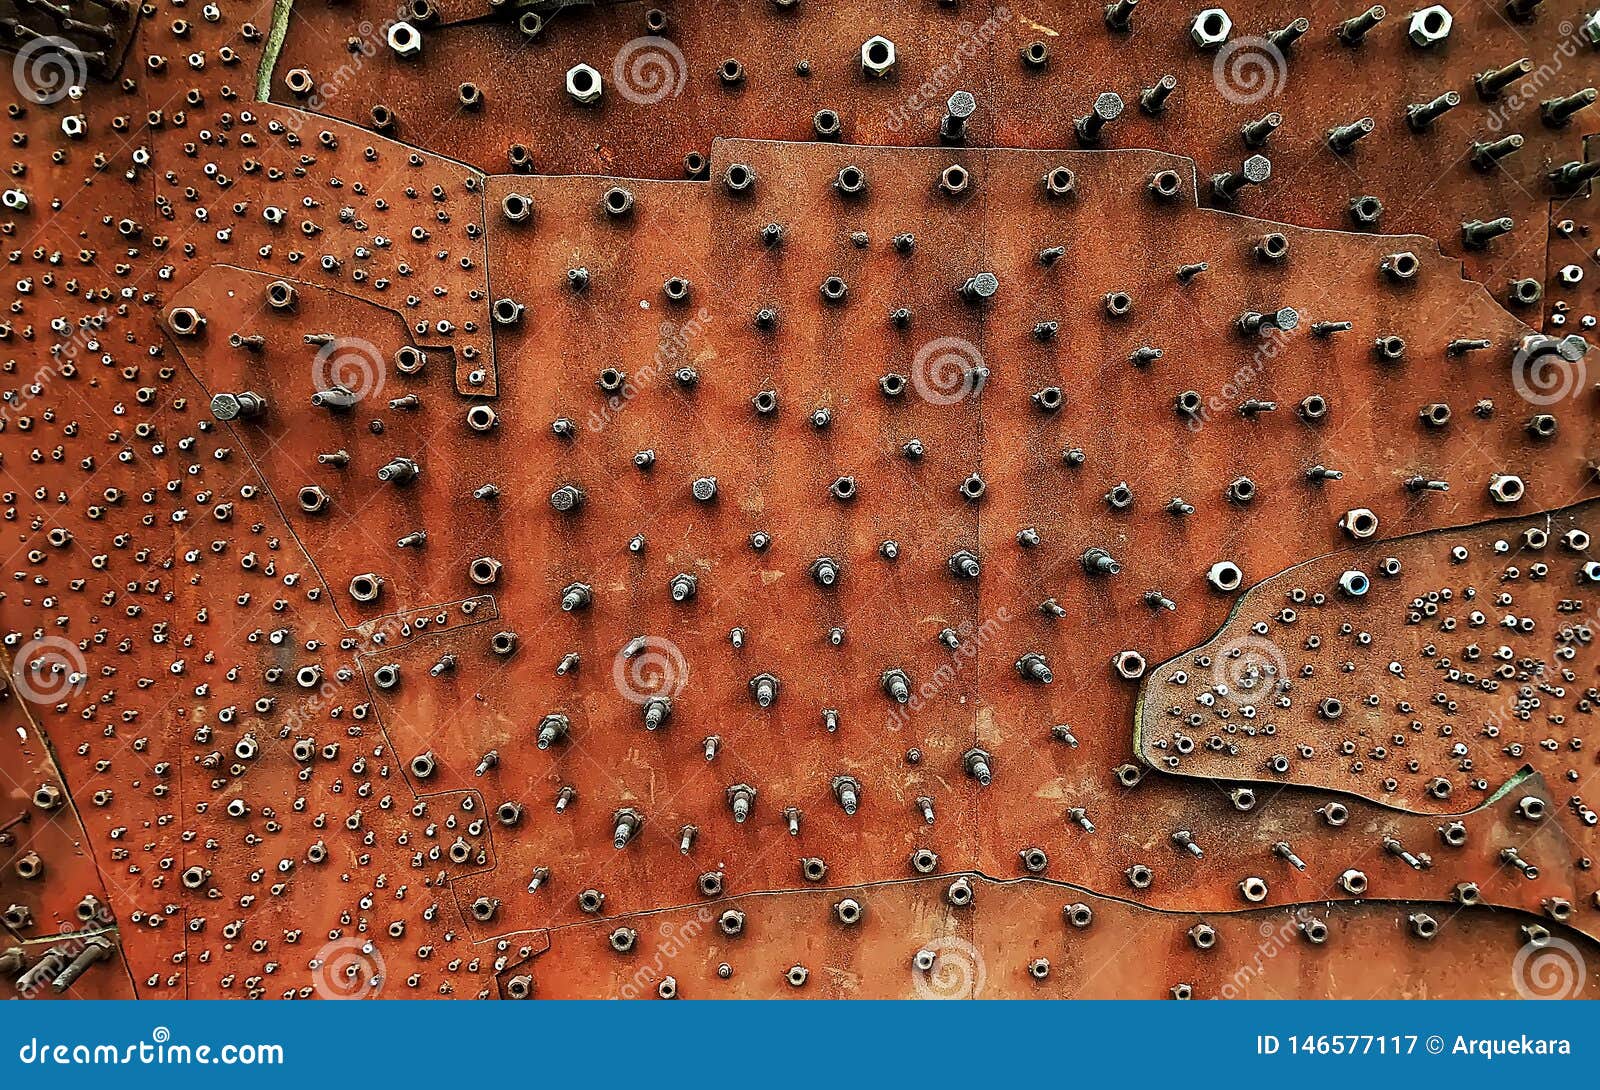 close up of many nuts on a copper wallboard